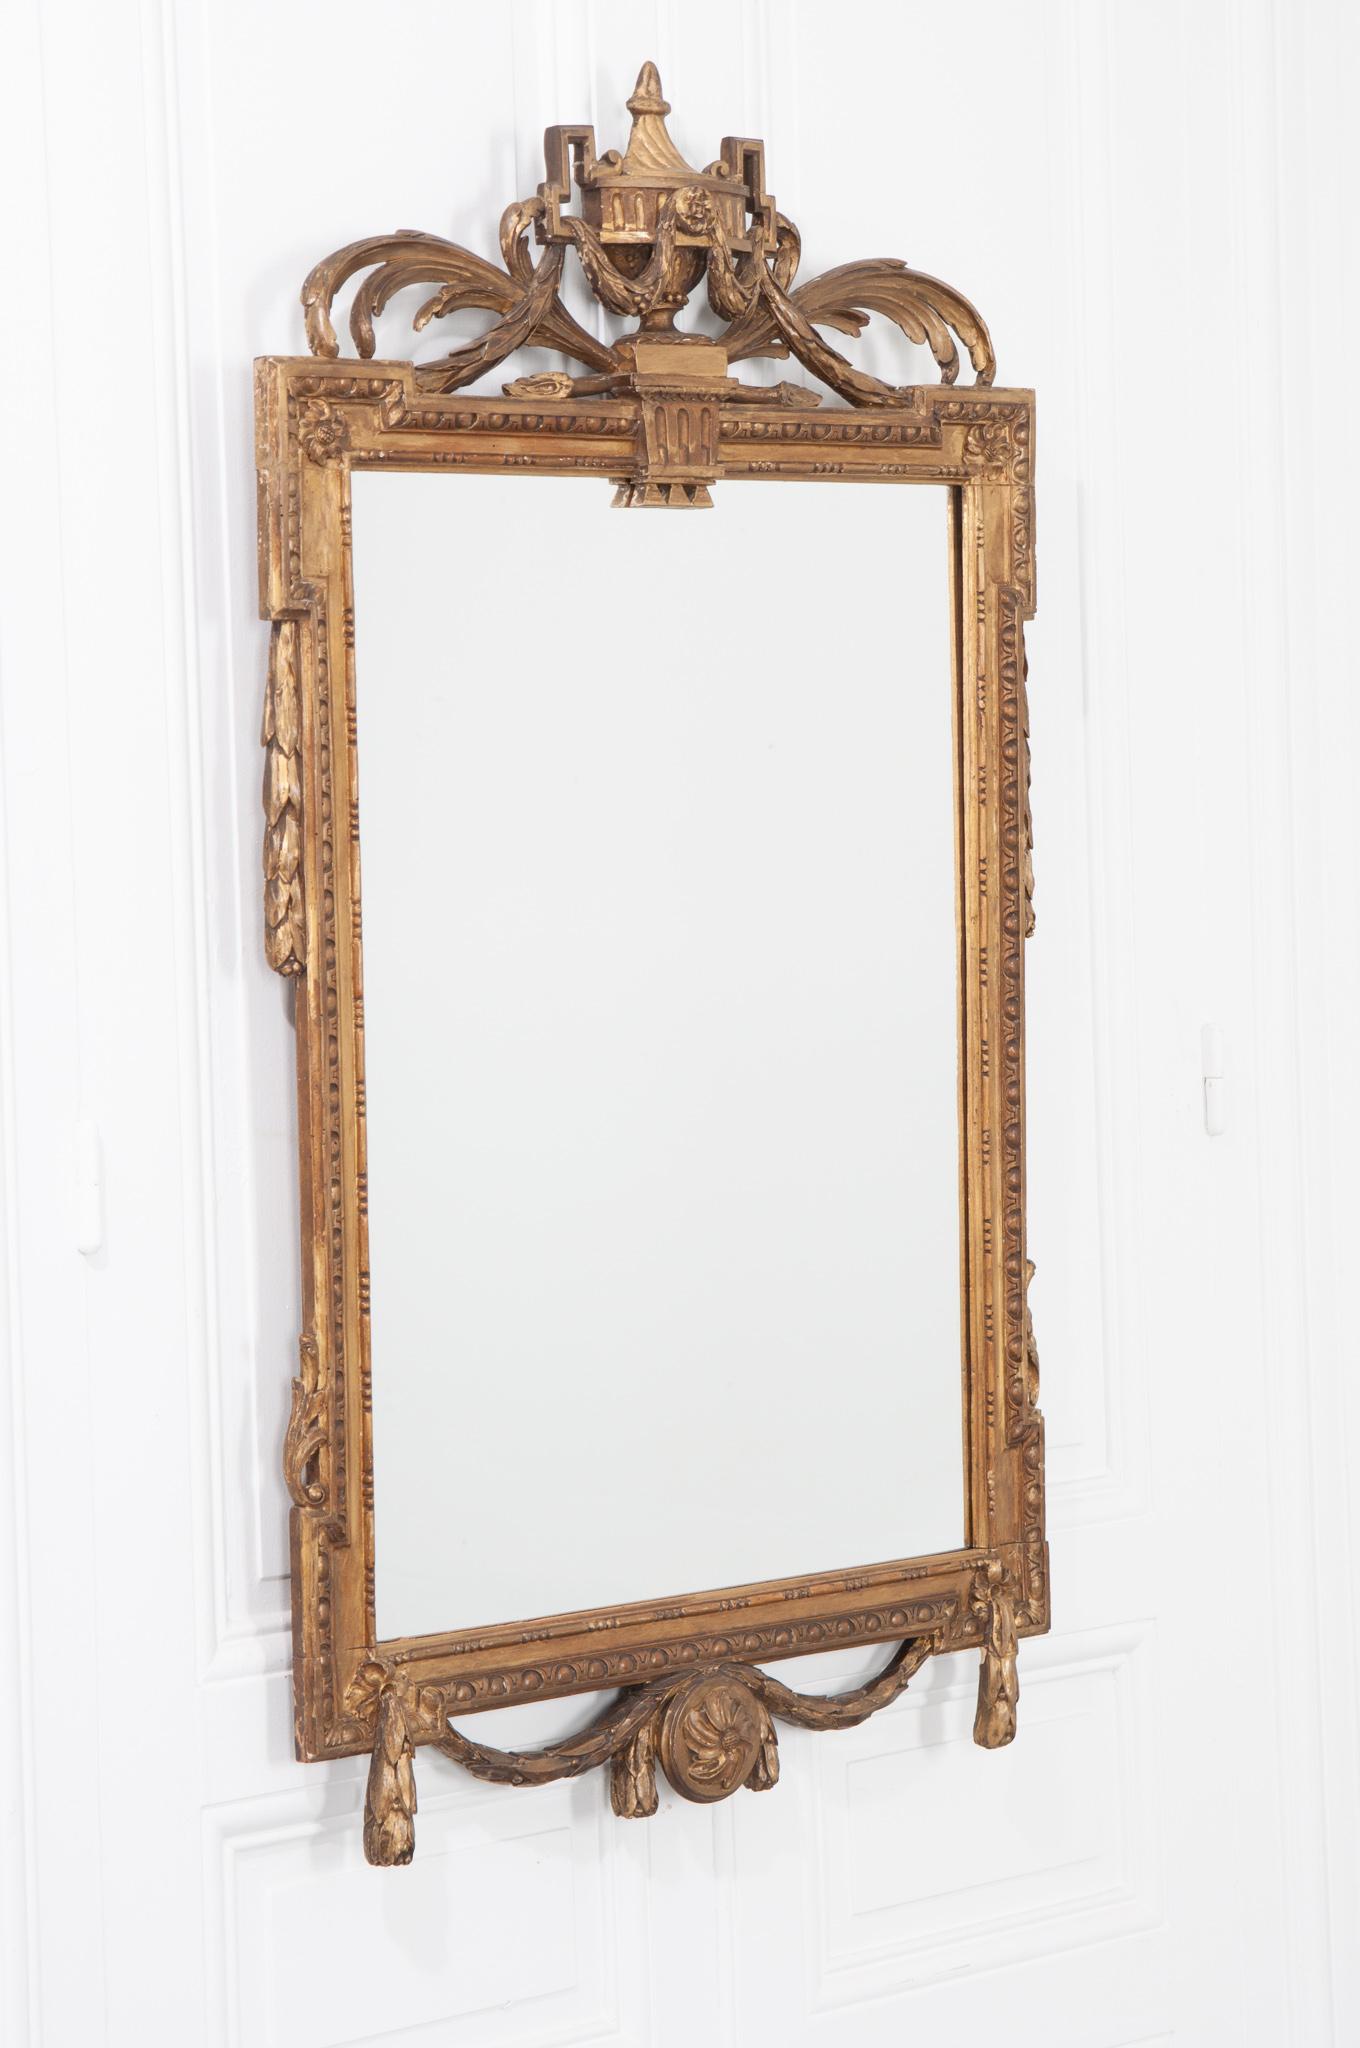 A delightful carved and painted mirror, made in Louis XVI style, 19th century, France. The mirror is crowned with a wonderfully carved crest depicting an urn, foliage and garlands. The new mirror glass is trimmed in a beautiful carved motif with